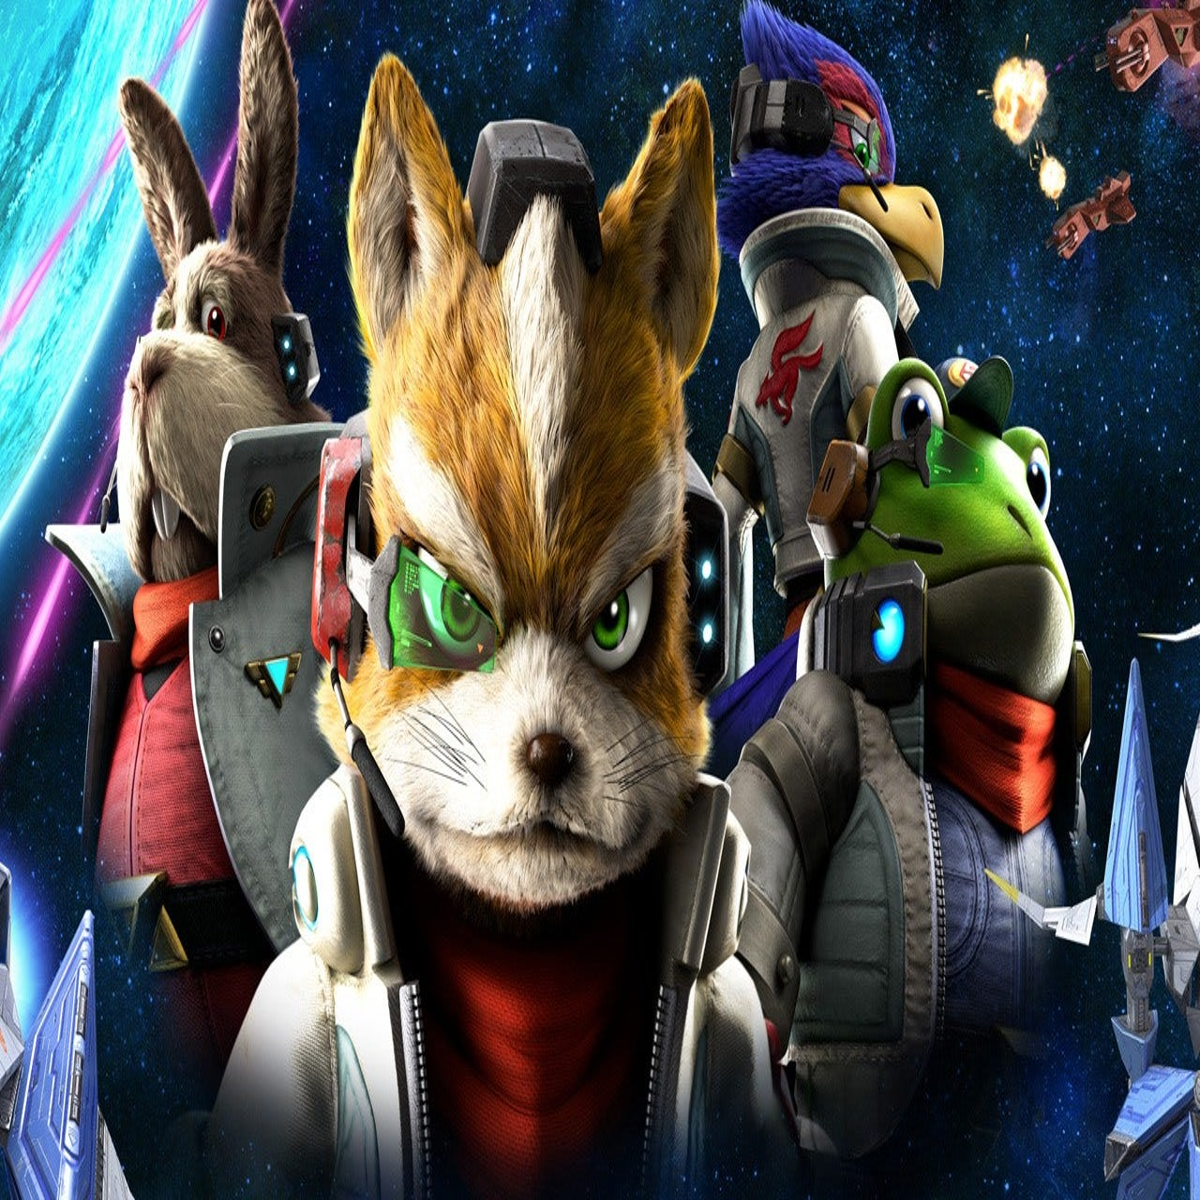 Star Fox Zero Developer Wants To Port The Game to Switch